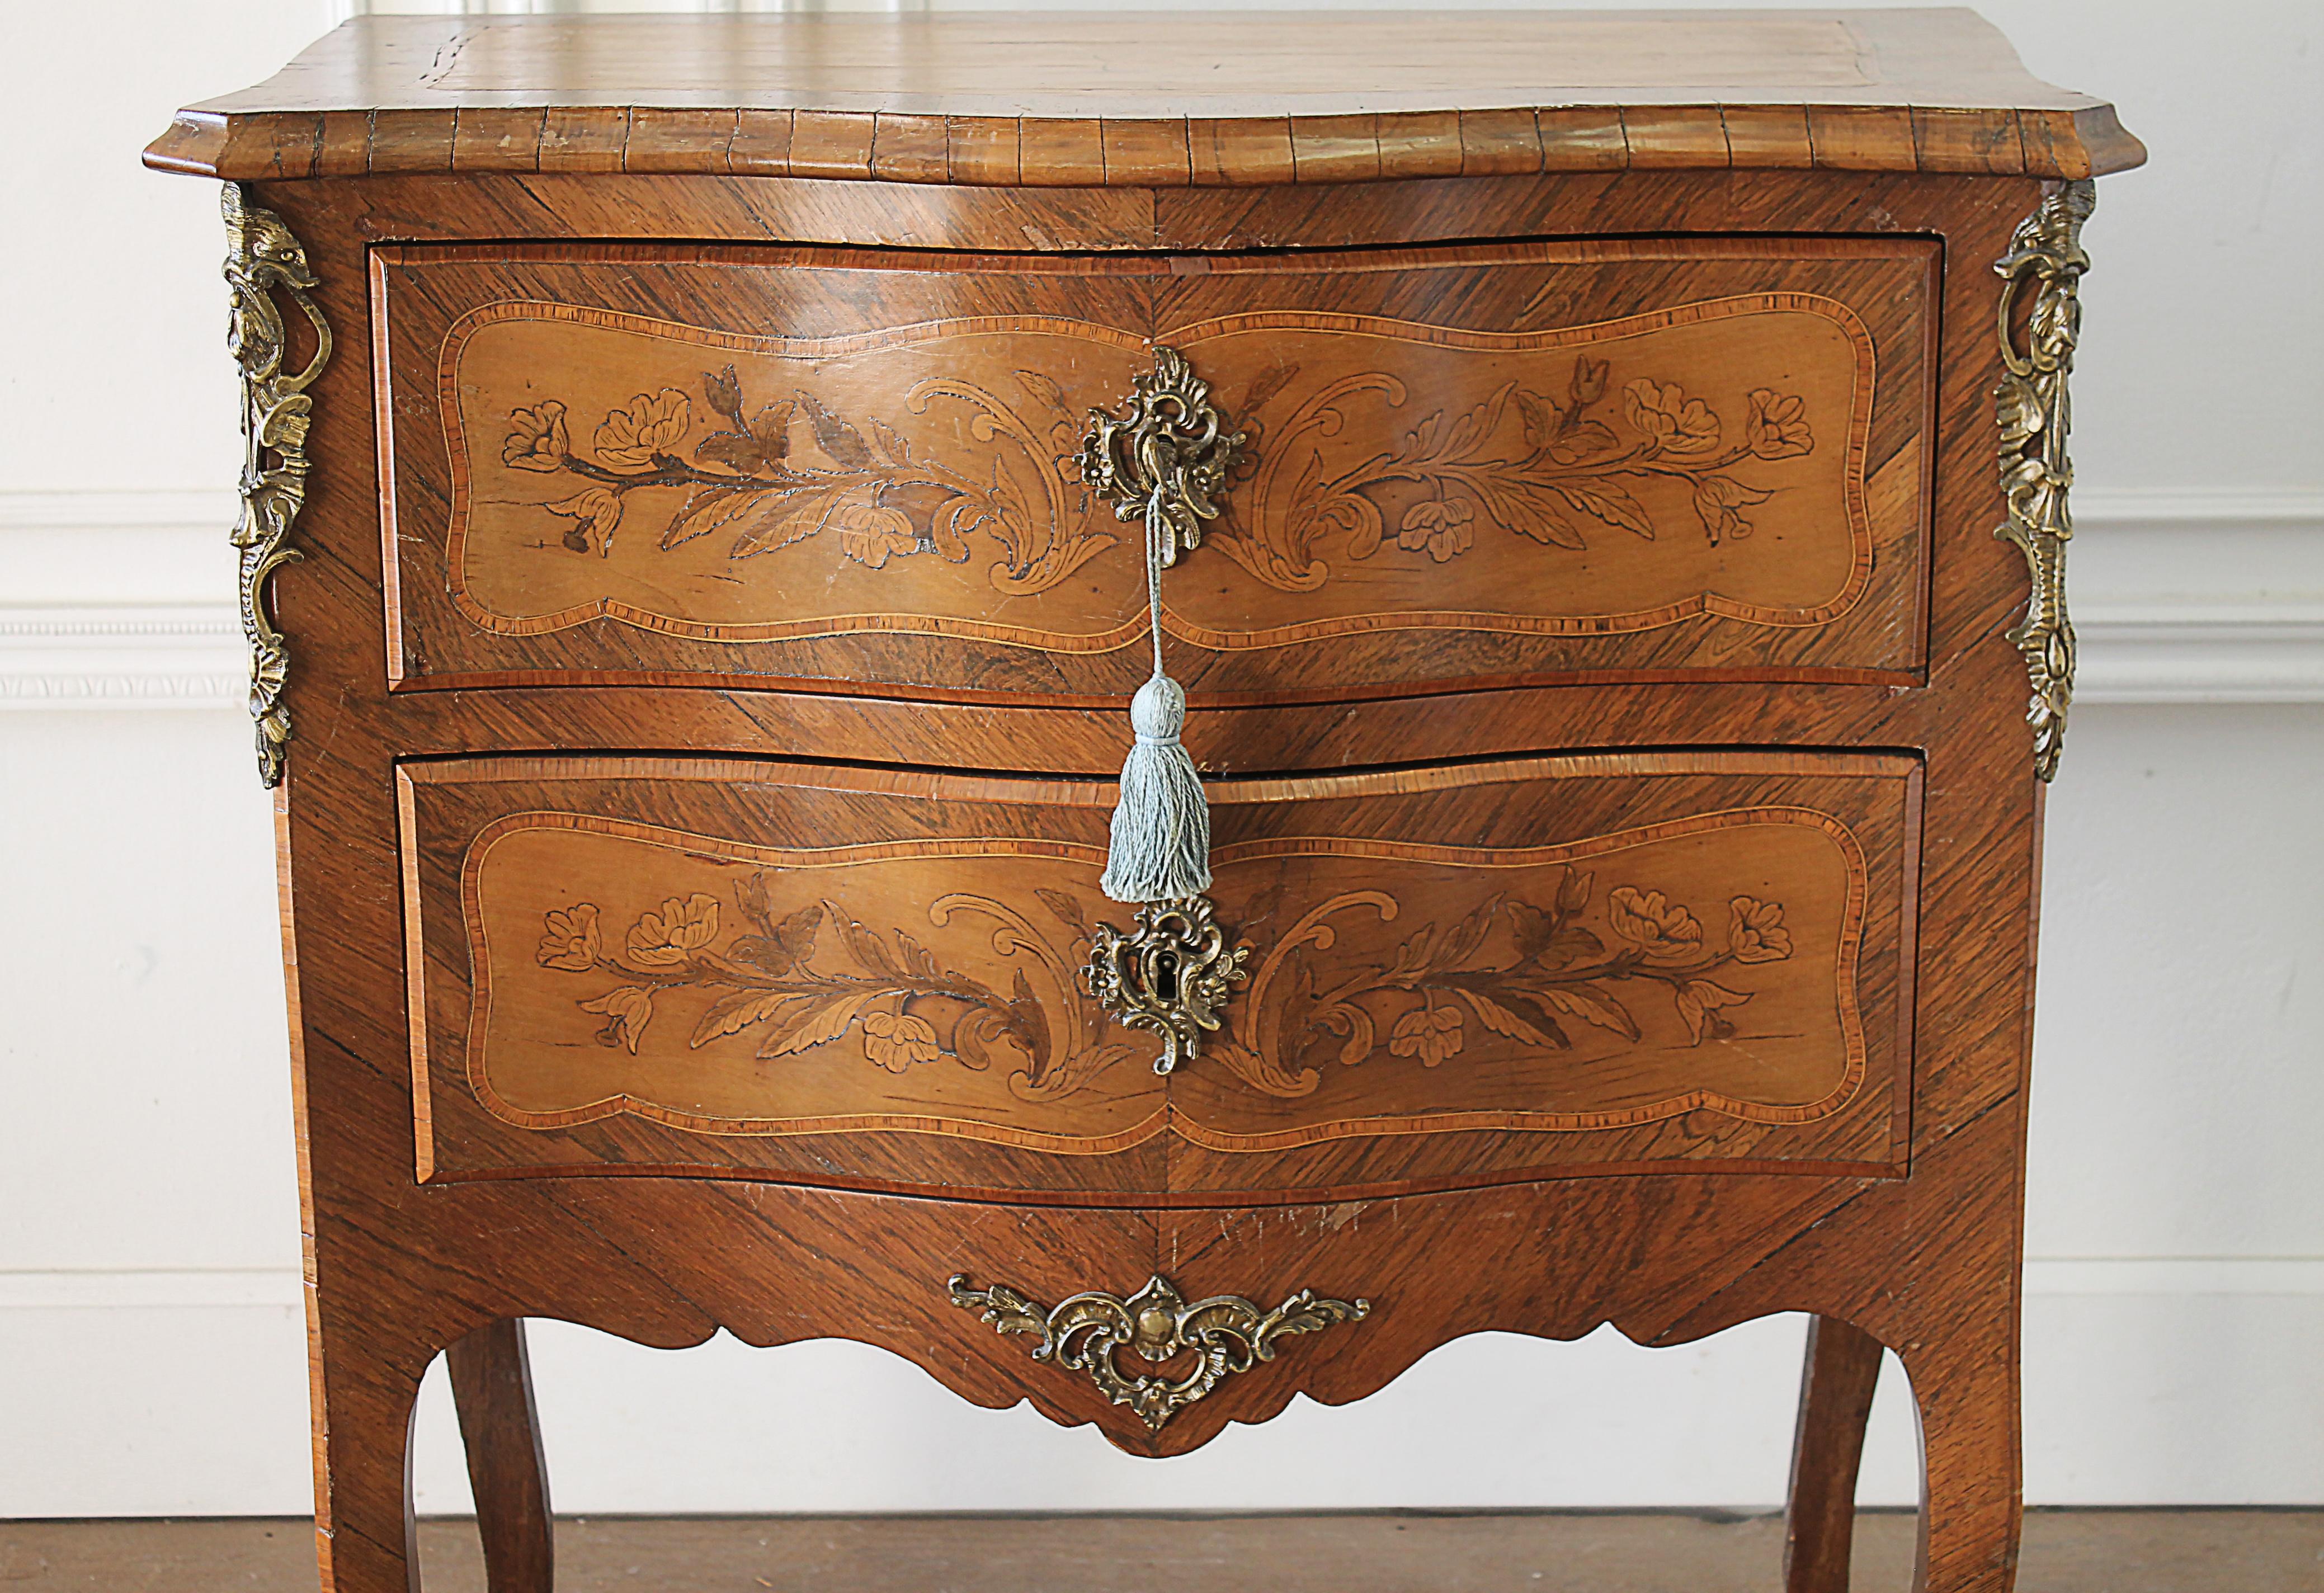 20th century Louis XV style inlay commode with bronze mounts
Beautiful 2-drawer commode with wonderful floral a shell inlays. Original working key and tassel included. This piece has a beautiful aged patina, and is solid and sturdy, great for